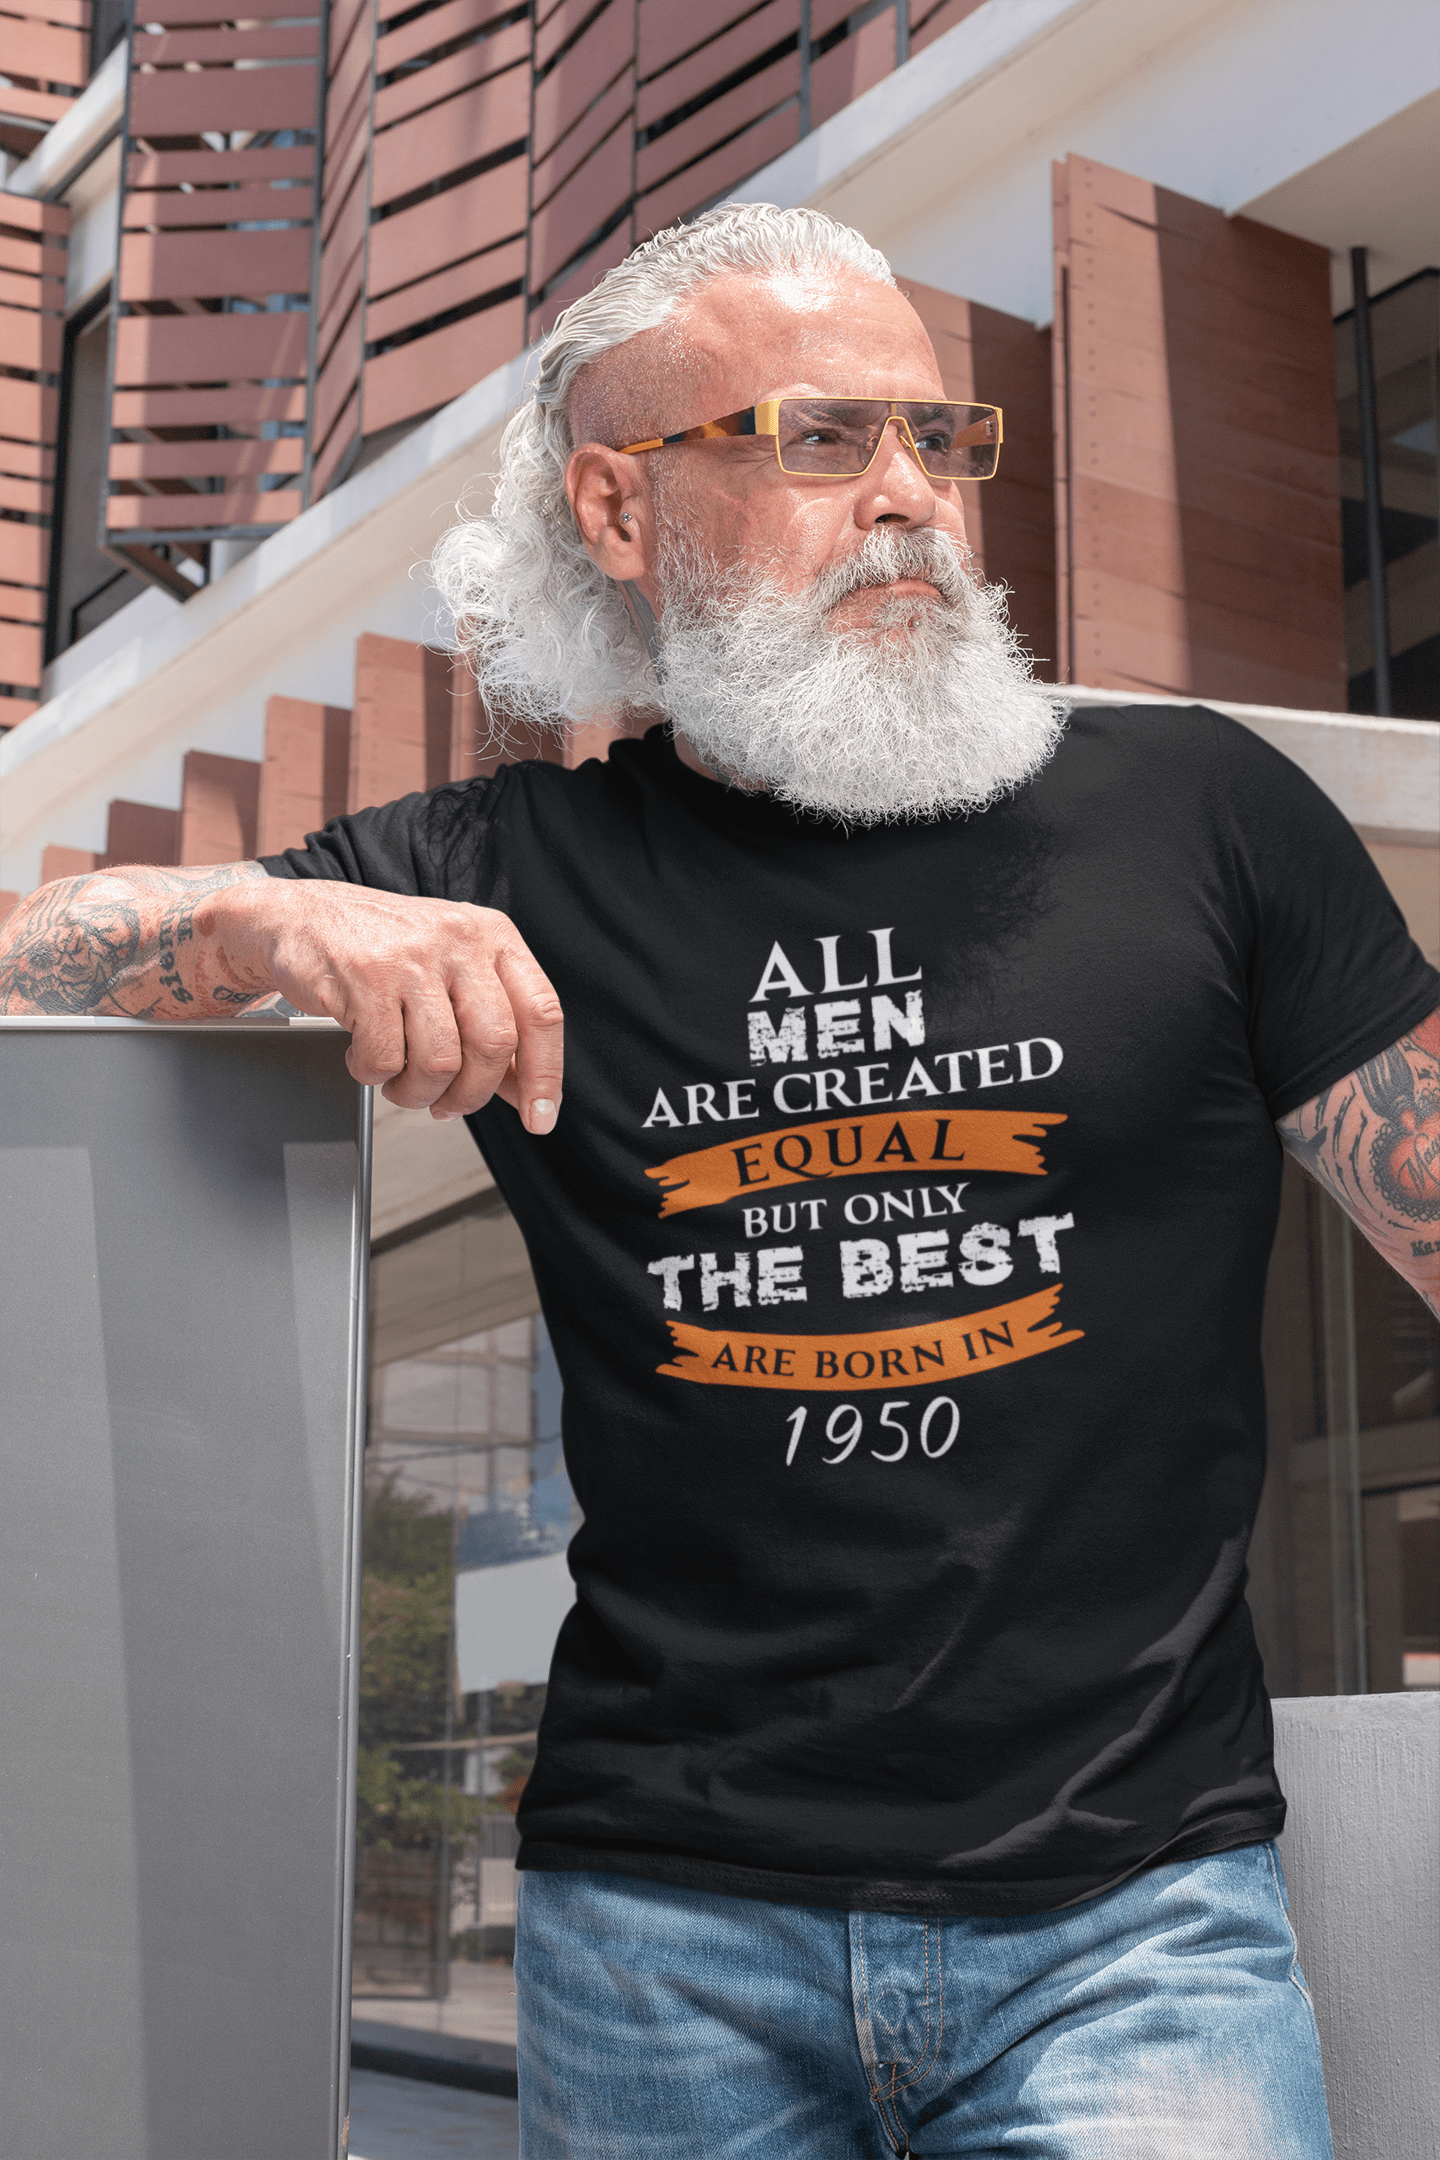 1950, Only the Best are Born in 1950 Men's T-shirt Black Birthday Gift Round Neck 00509